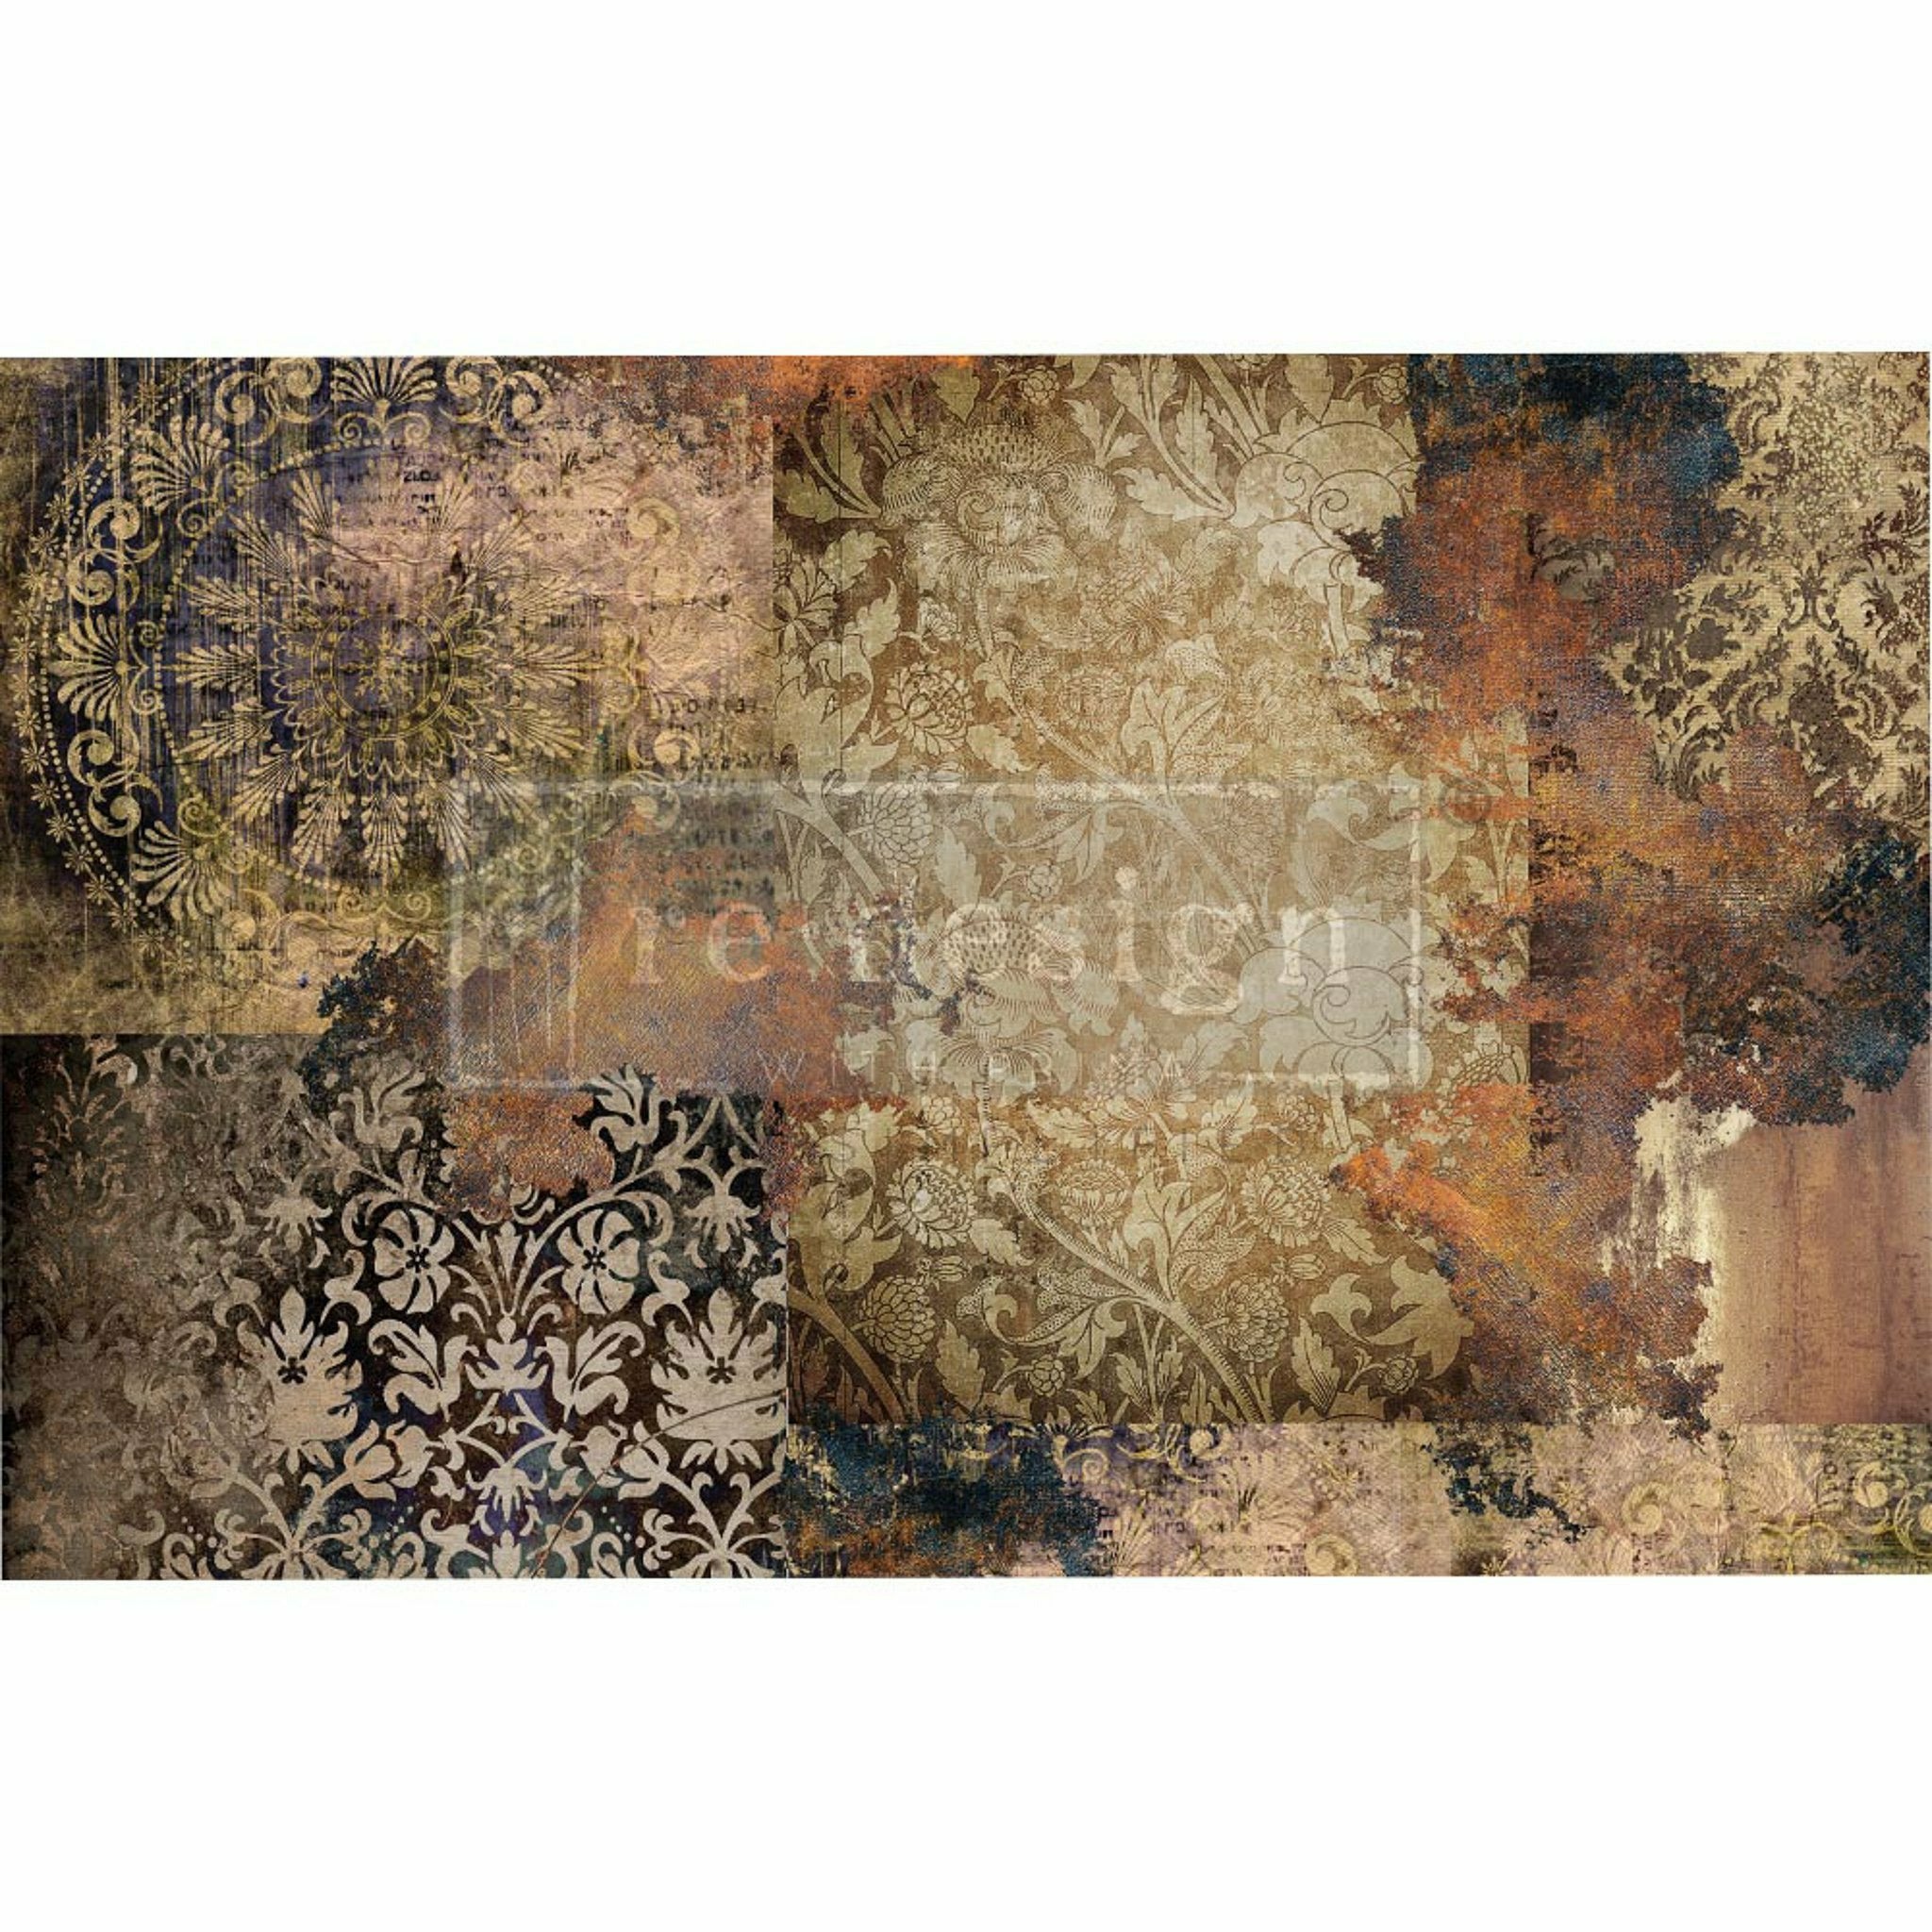 Tissue paper design that features a collage of weathered vintage damask patterns. White borders are on the top and bottom.